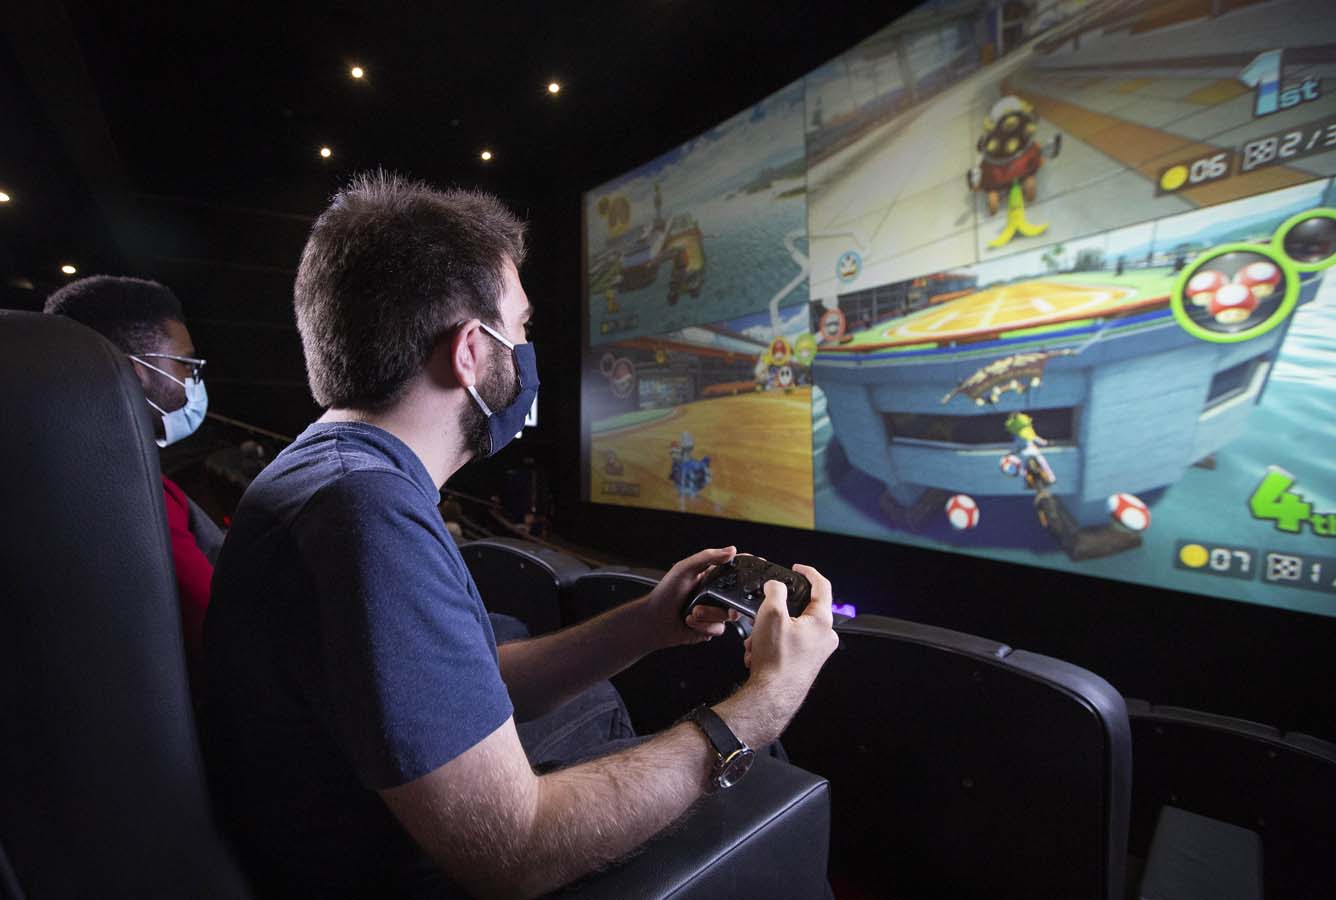 Experience Games On The Big Screen At Cineworld